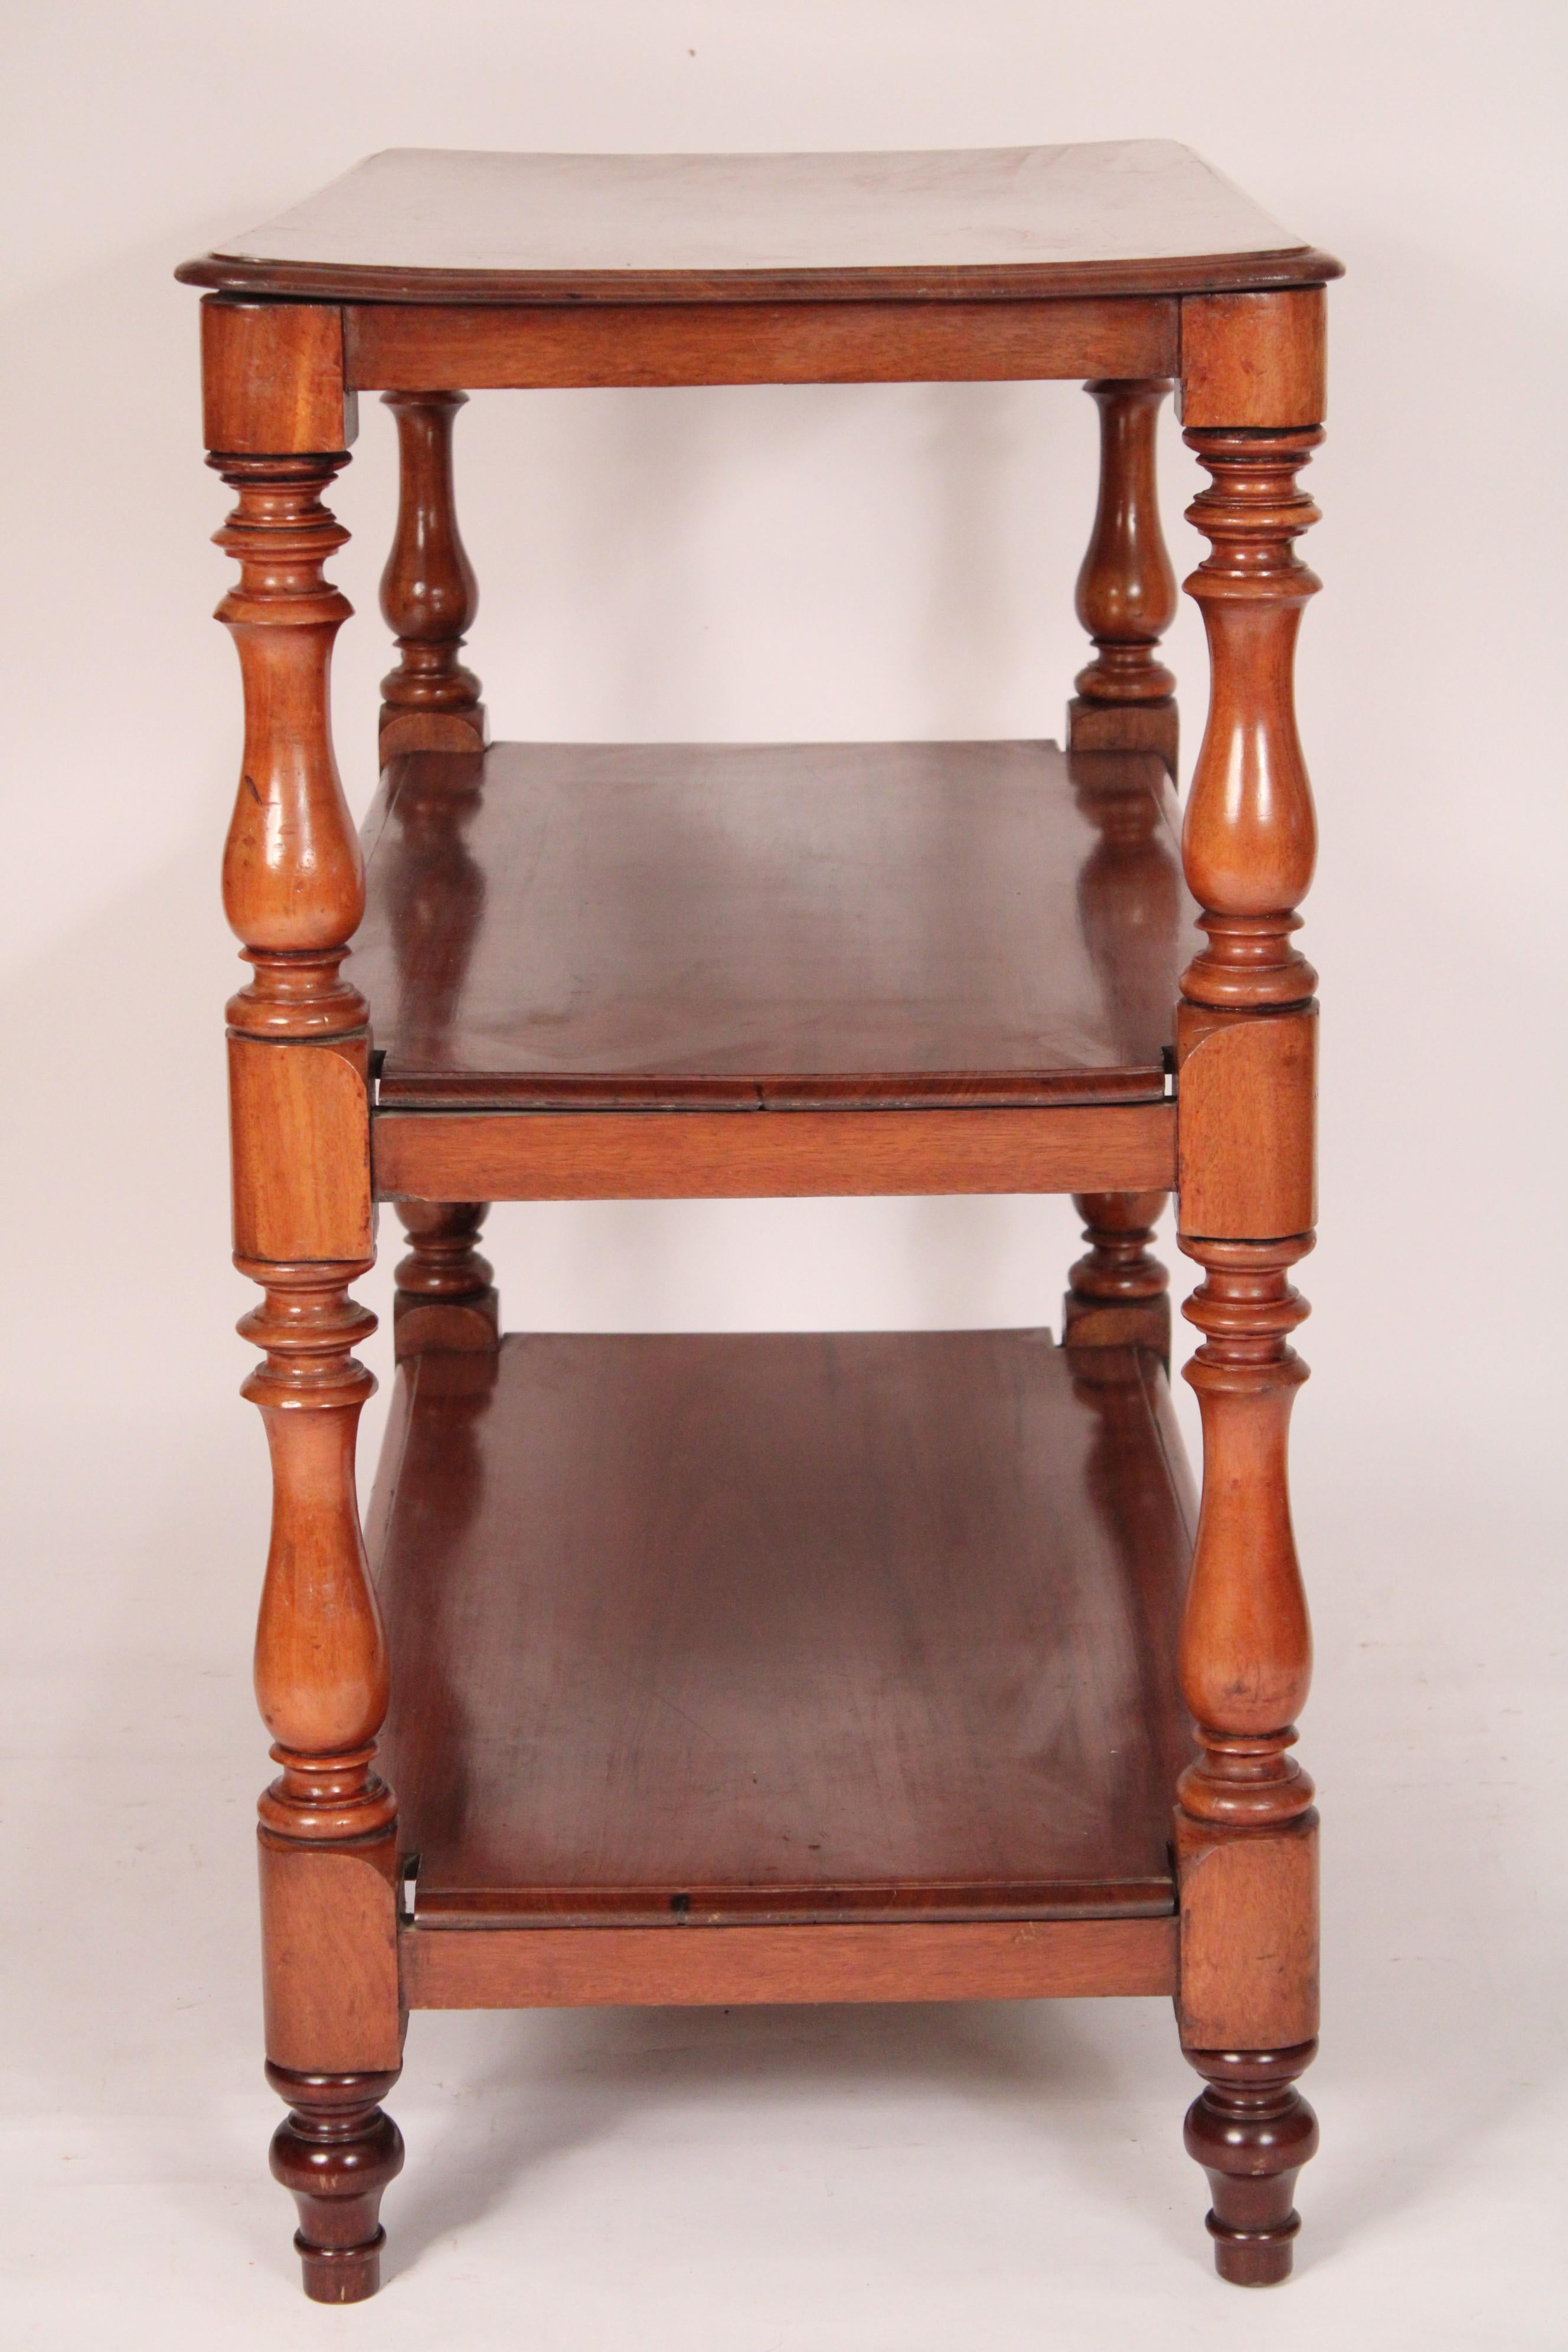 English Antique William IV Style 3 Tier Etagere  For Sale